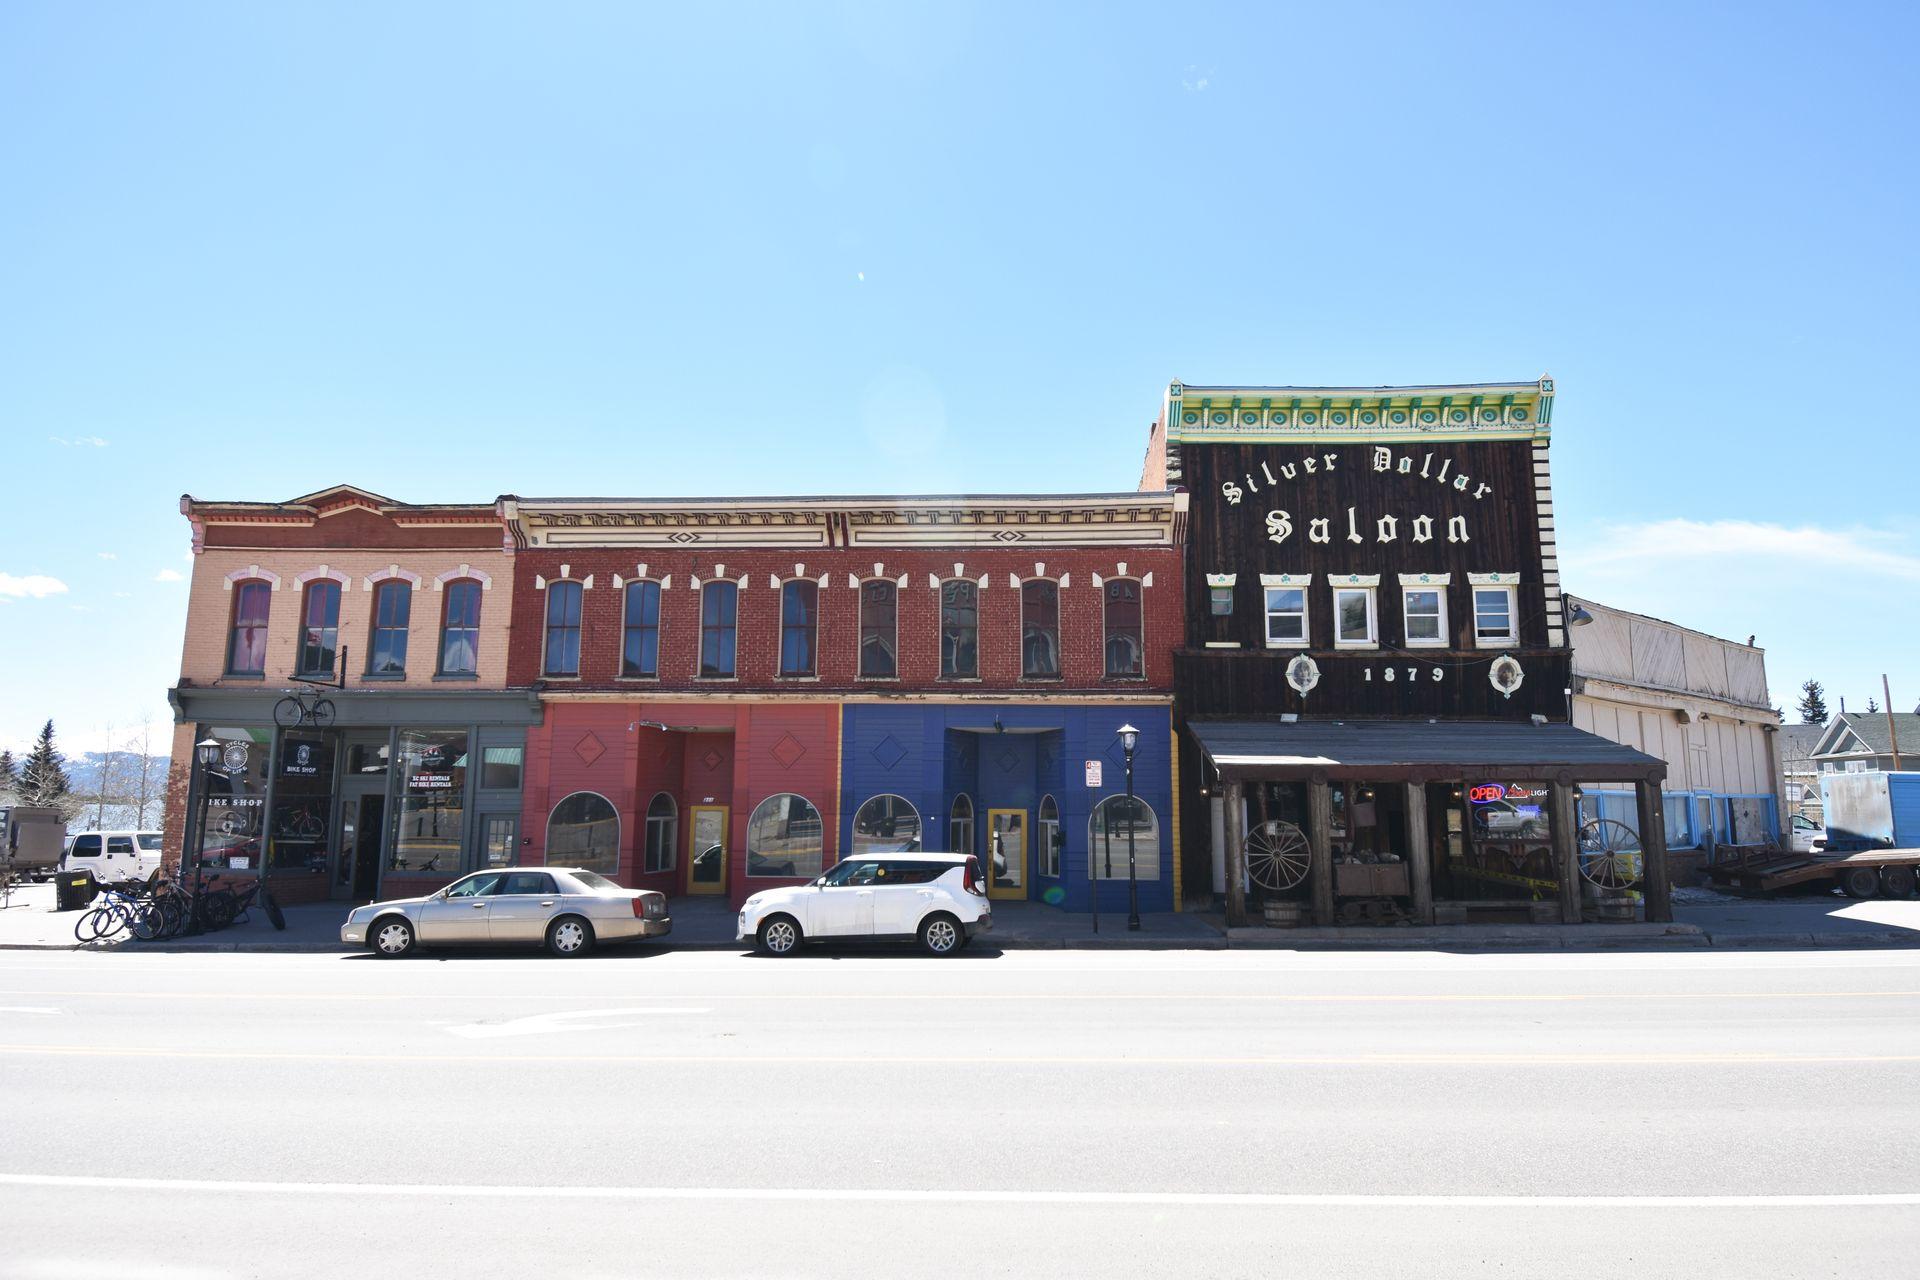 Looking across the street at the Silver Dollar Saloon in Leadville